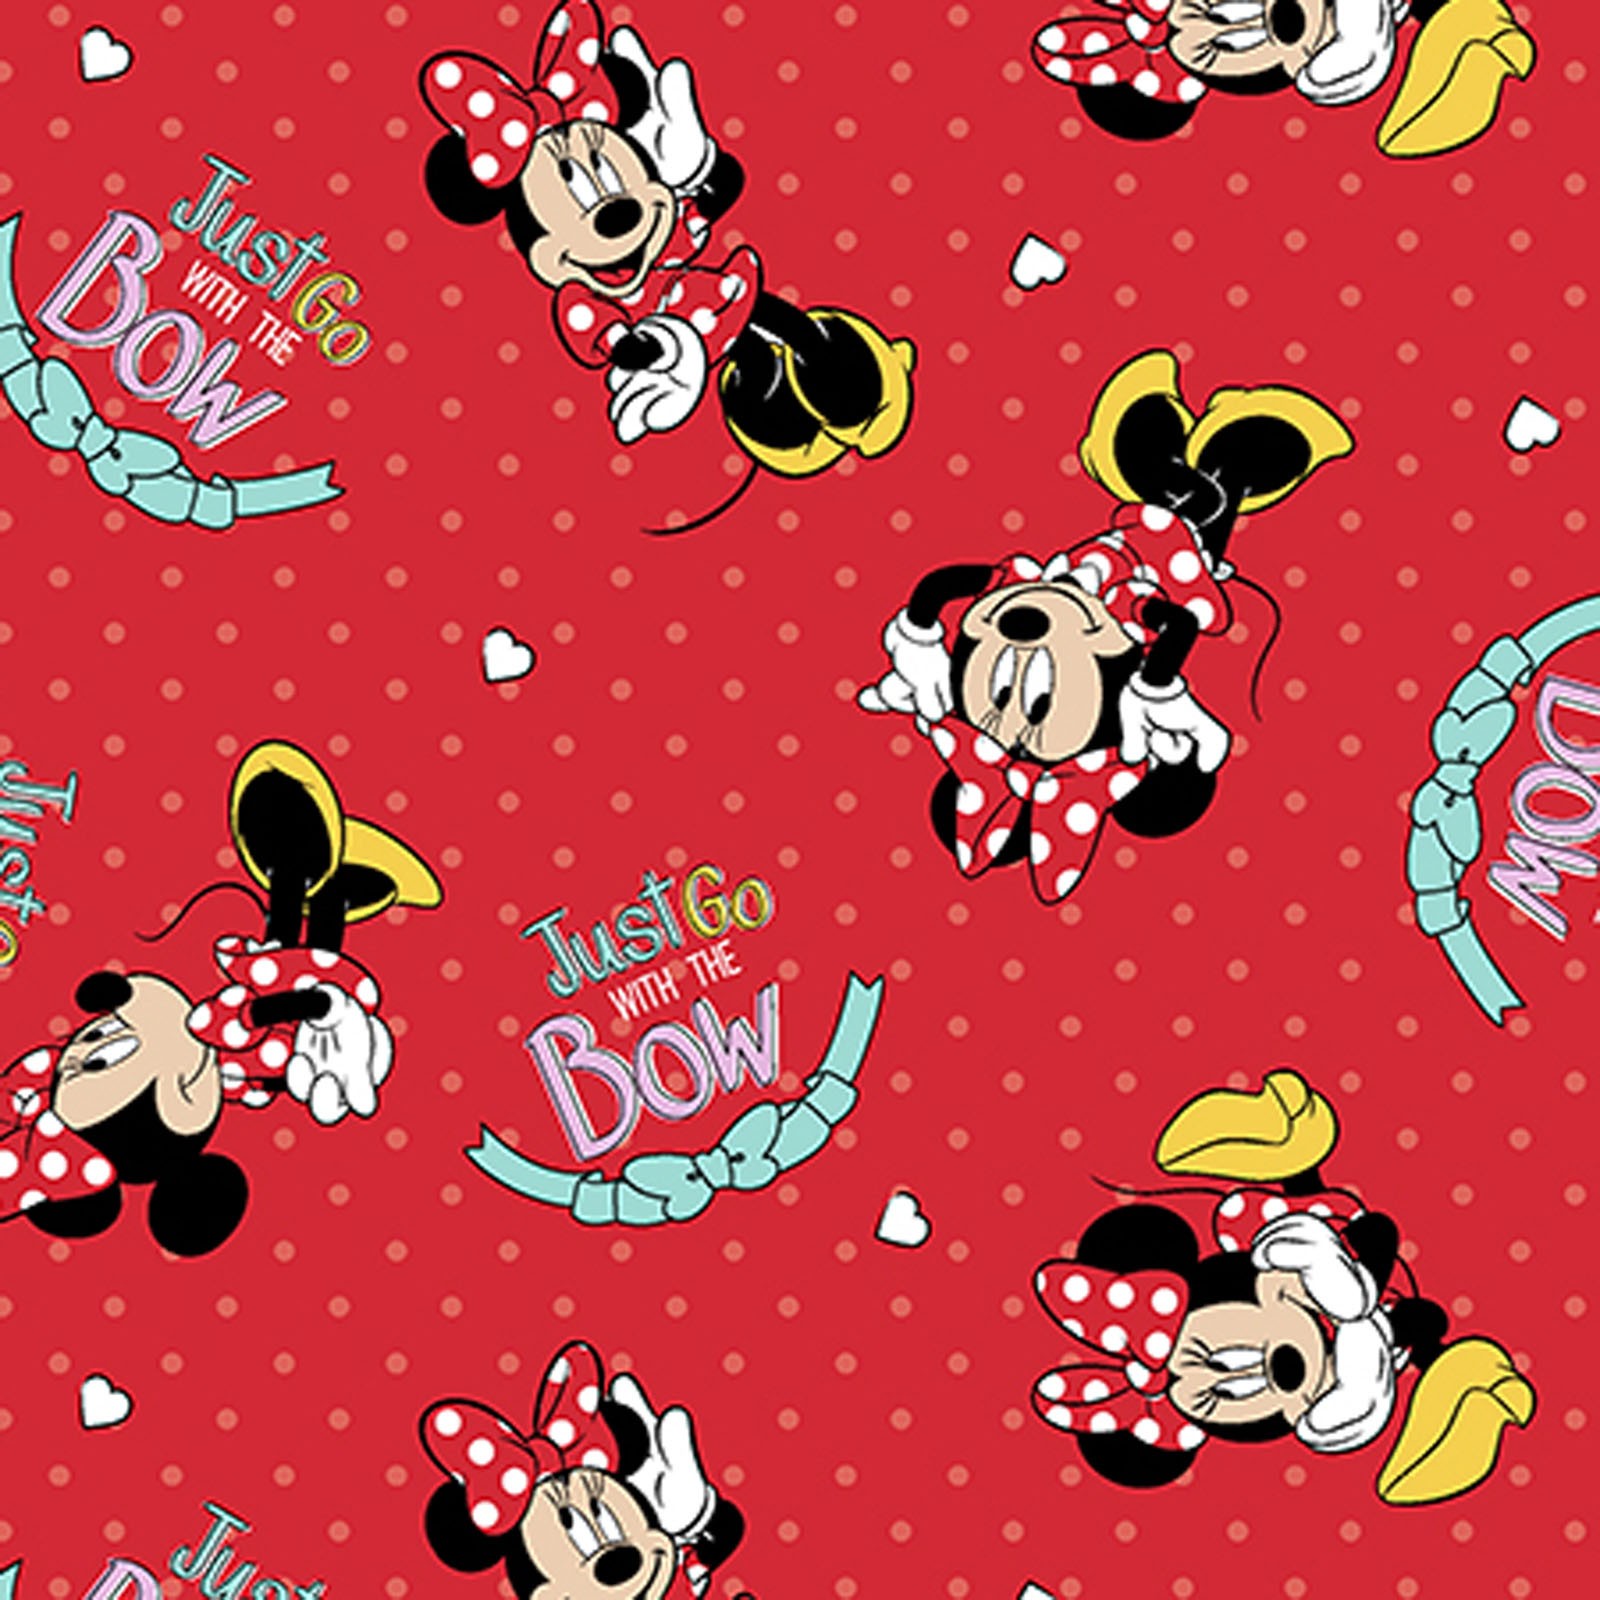 Jersey - Minnie Mouse Go with the Bow Fabric